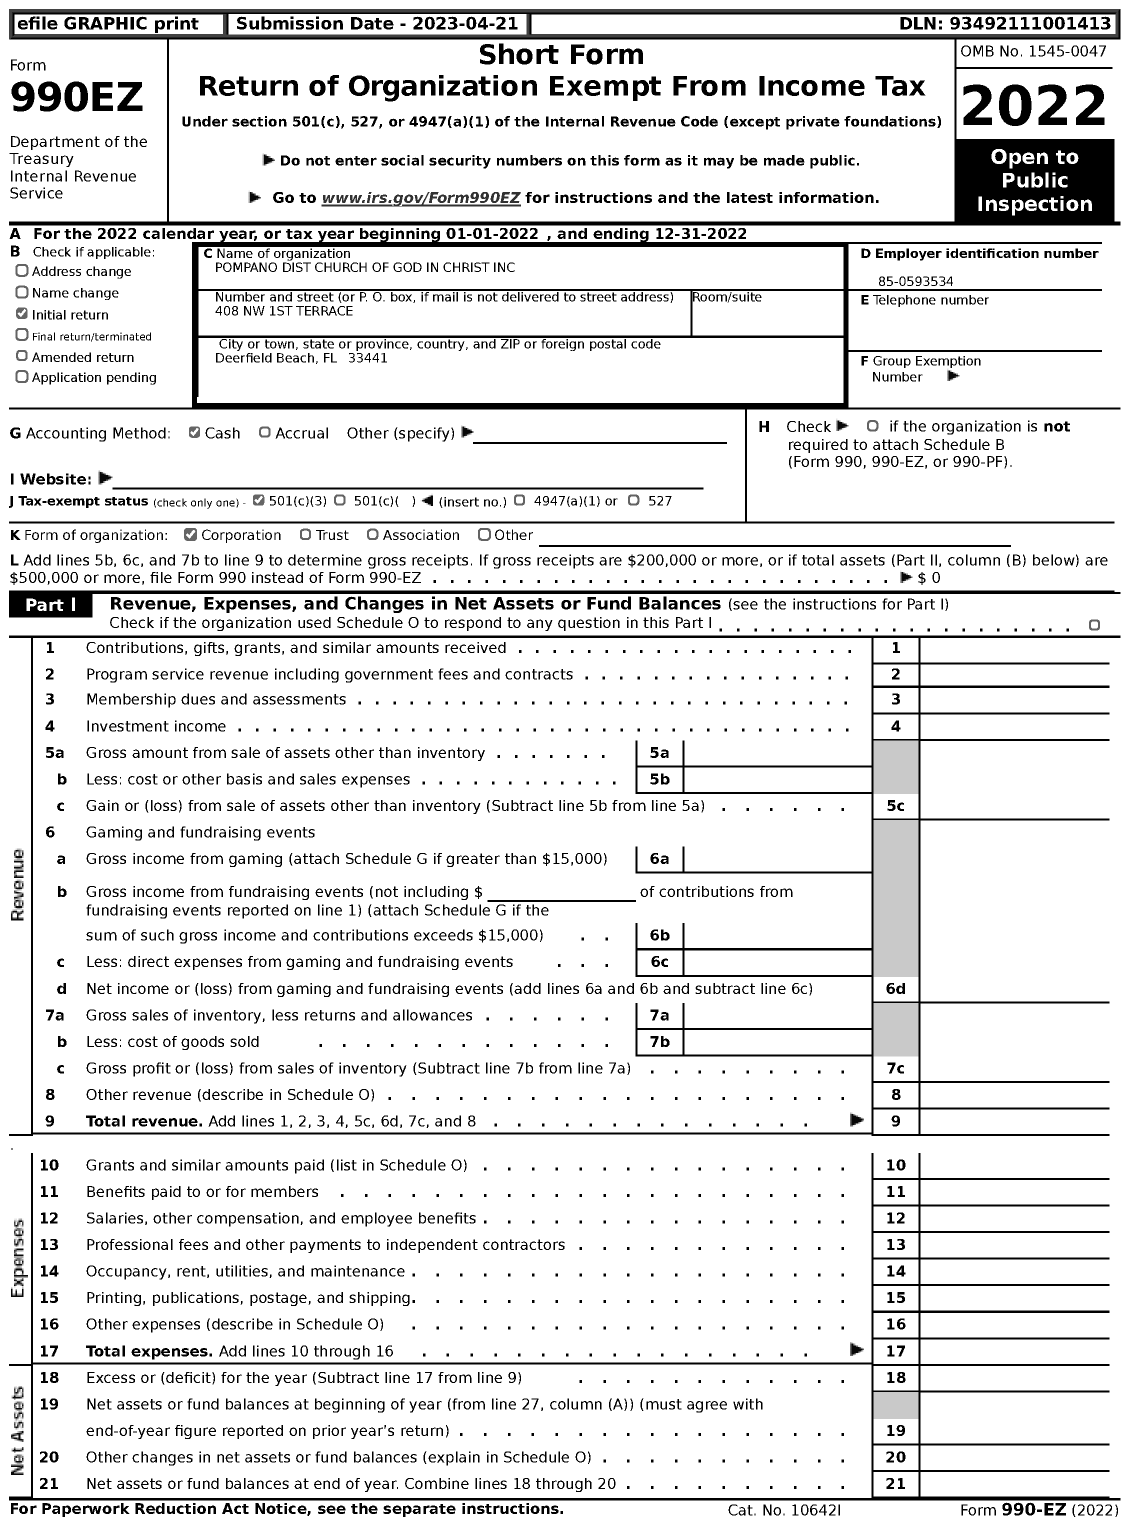 Image of first page of 2022 Form 990EZ for Pompano District Church of God in Christ